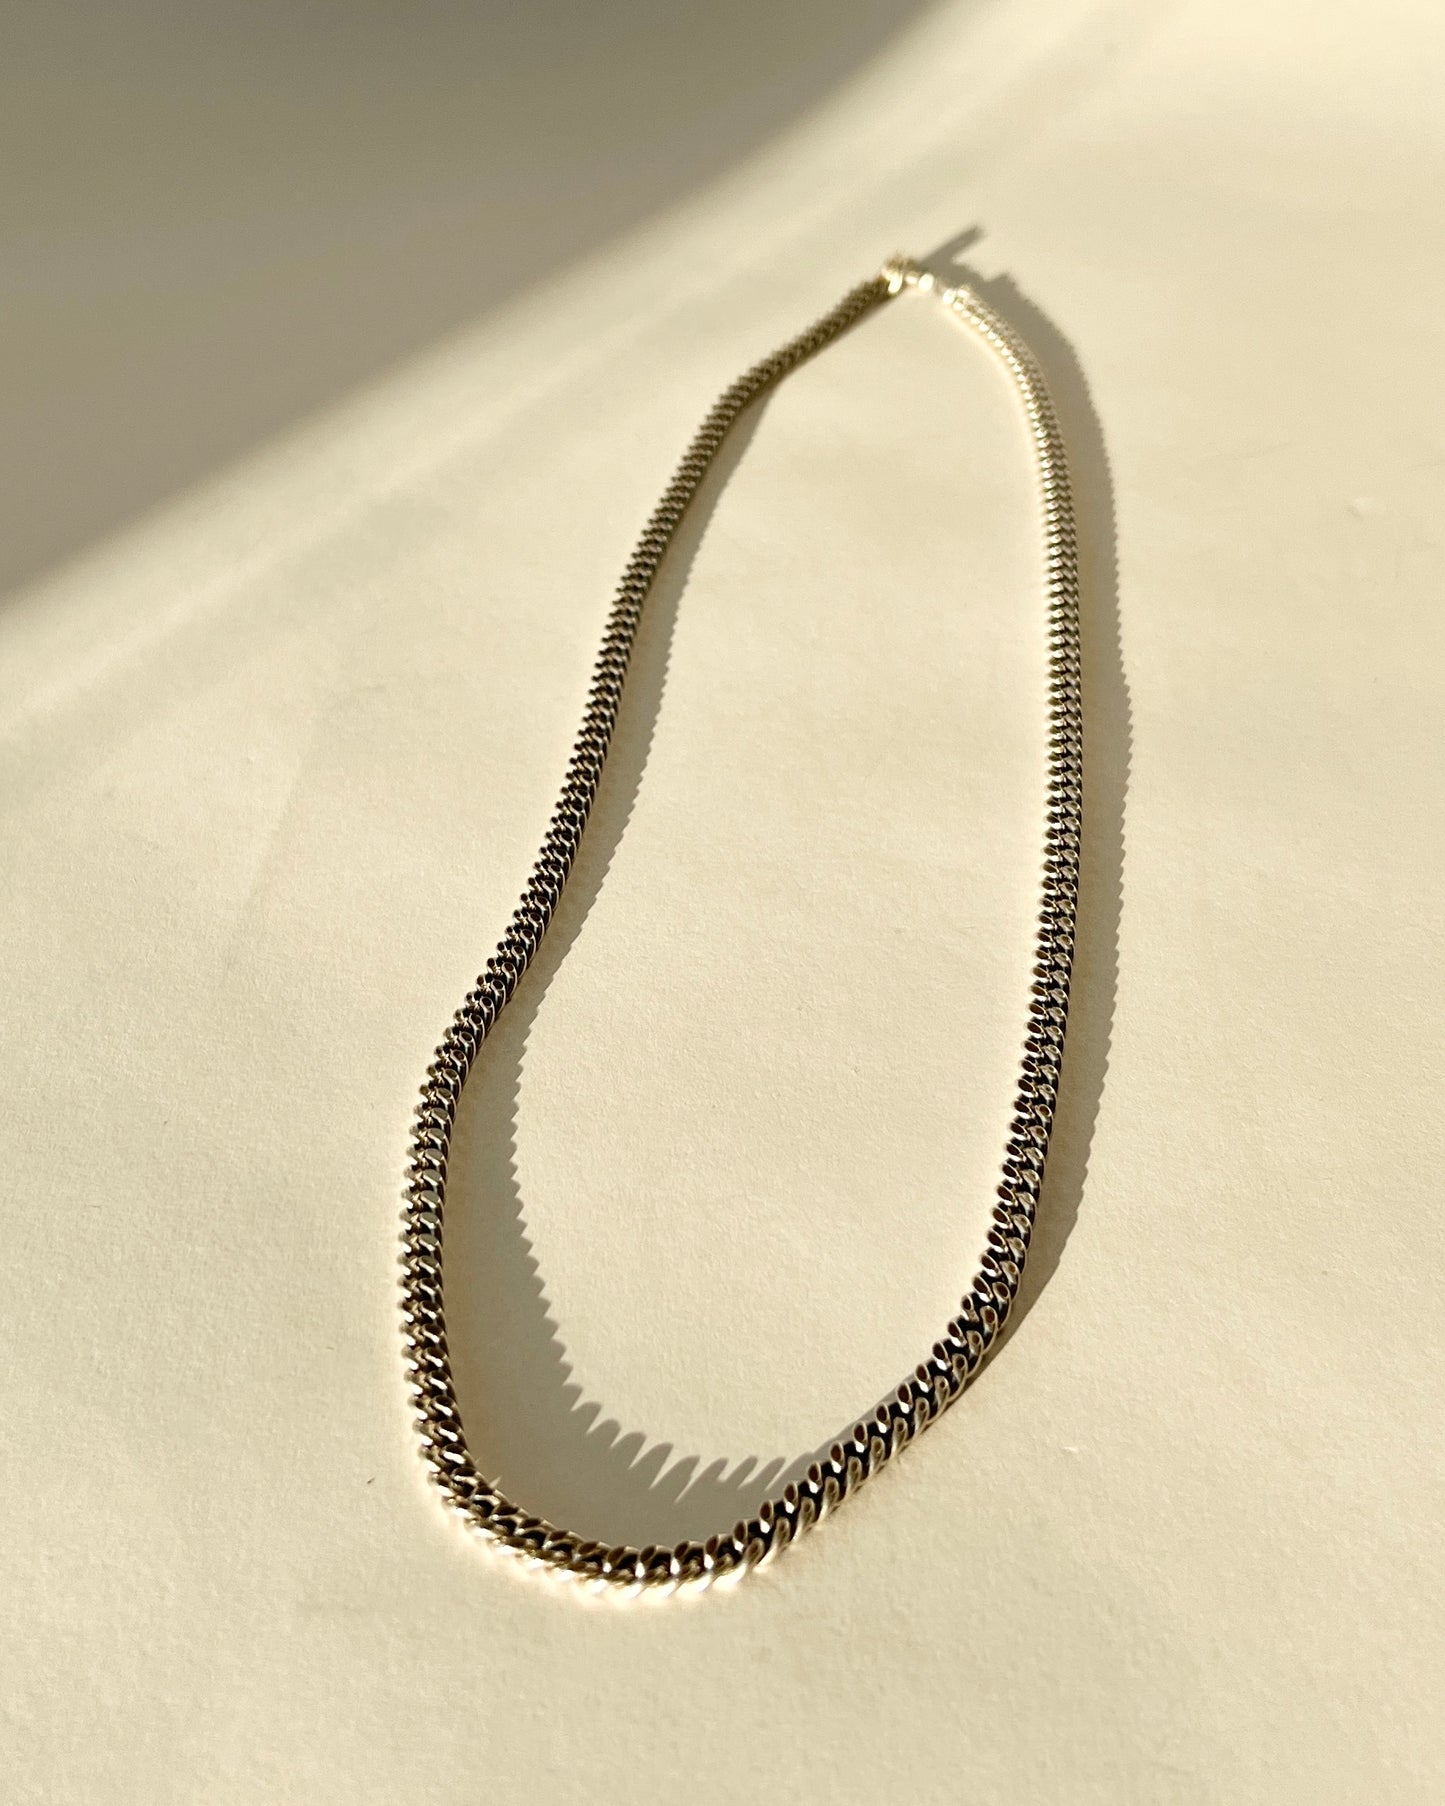 heavy silver chain with S hook closure